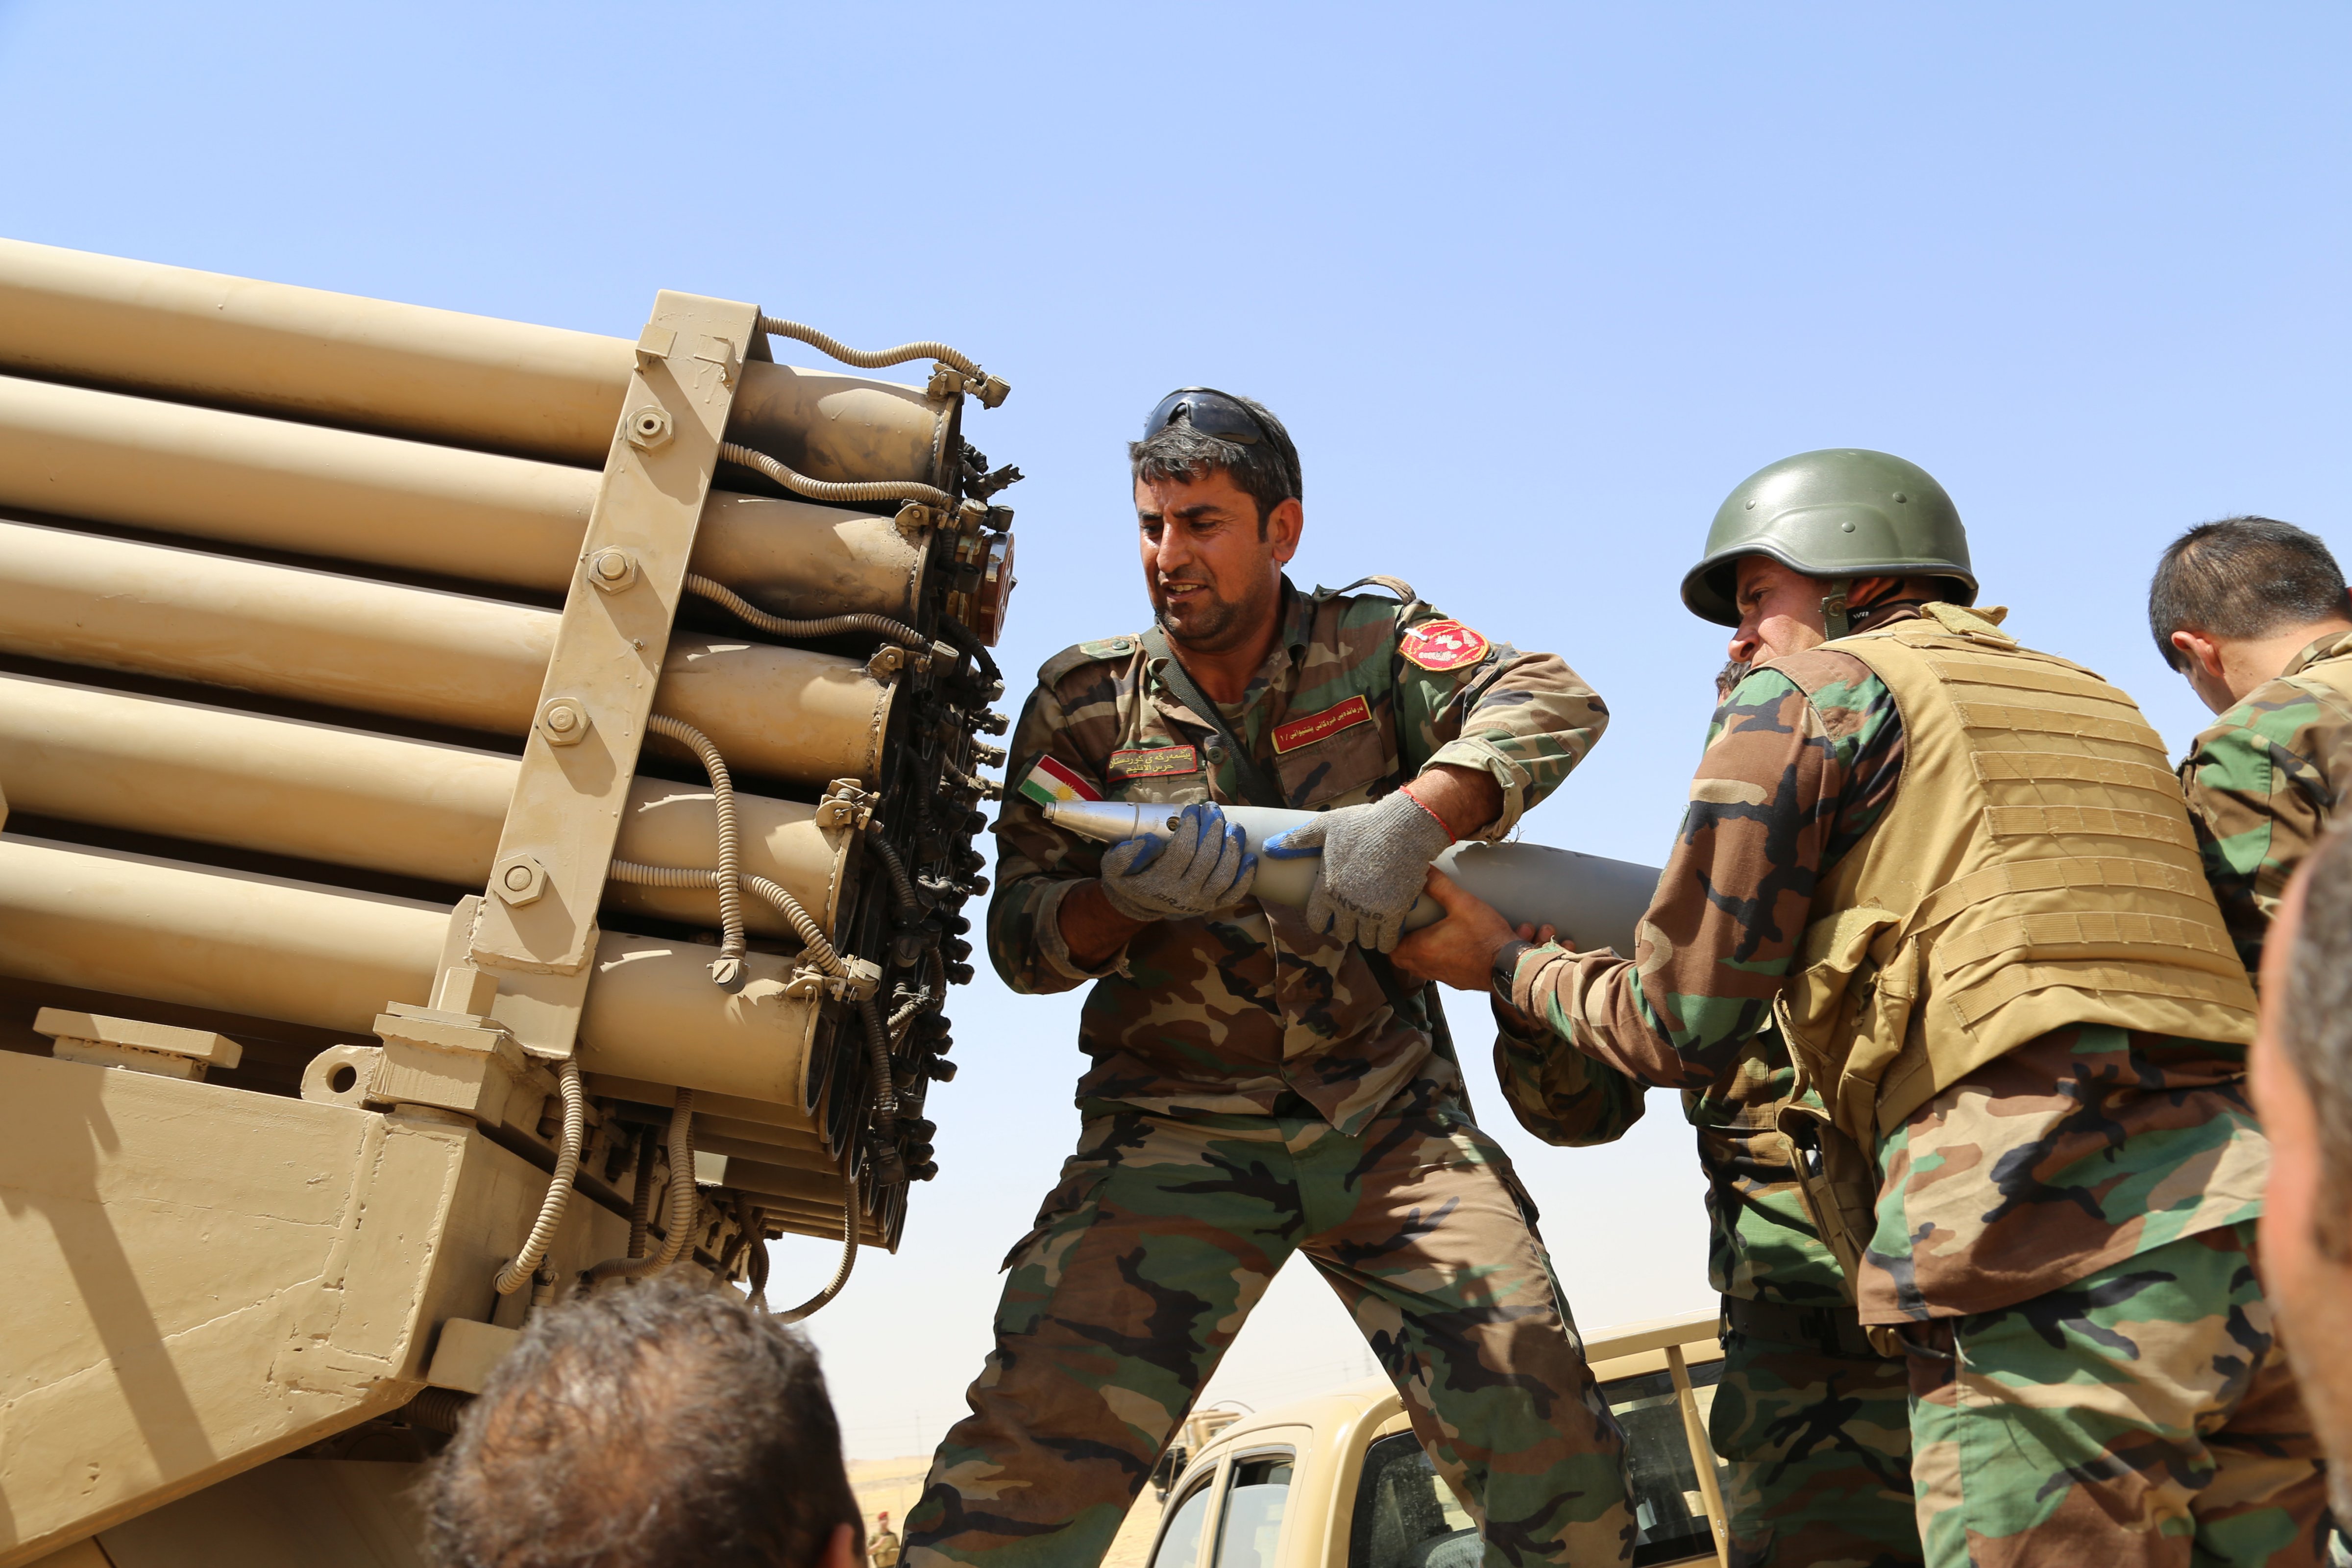 Kurdish peshmerga fighters load missile launcher during the clashes with the army groups led by Islamic State of Iraq and the Levant (ISIL) in Mosul, Iraq on 8 August, 2014. (Anadolu Agency&mdash;Getty Images)